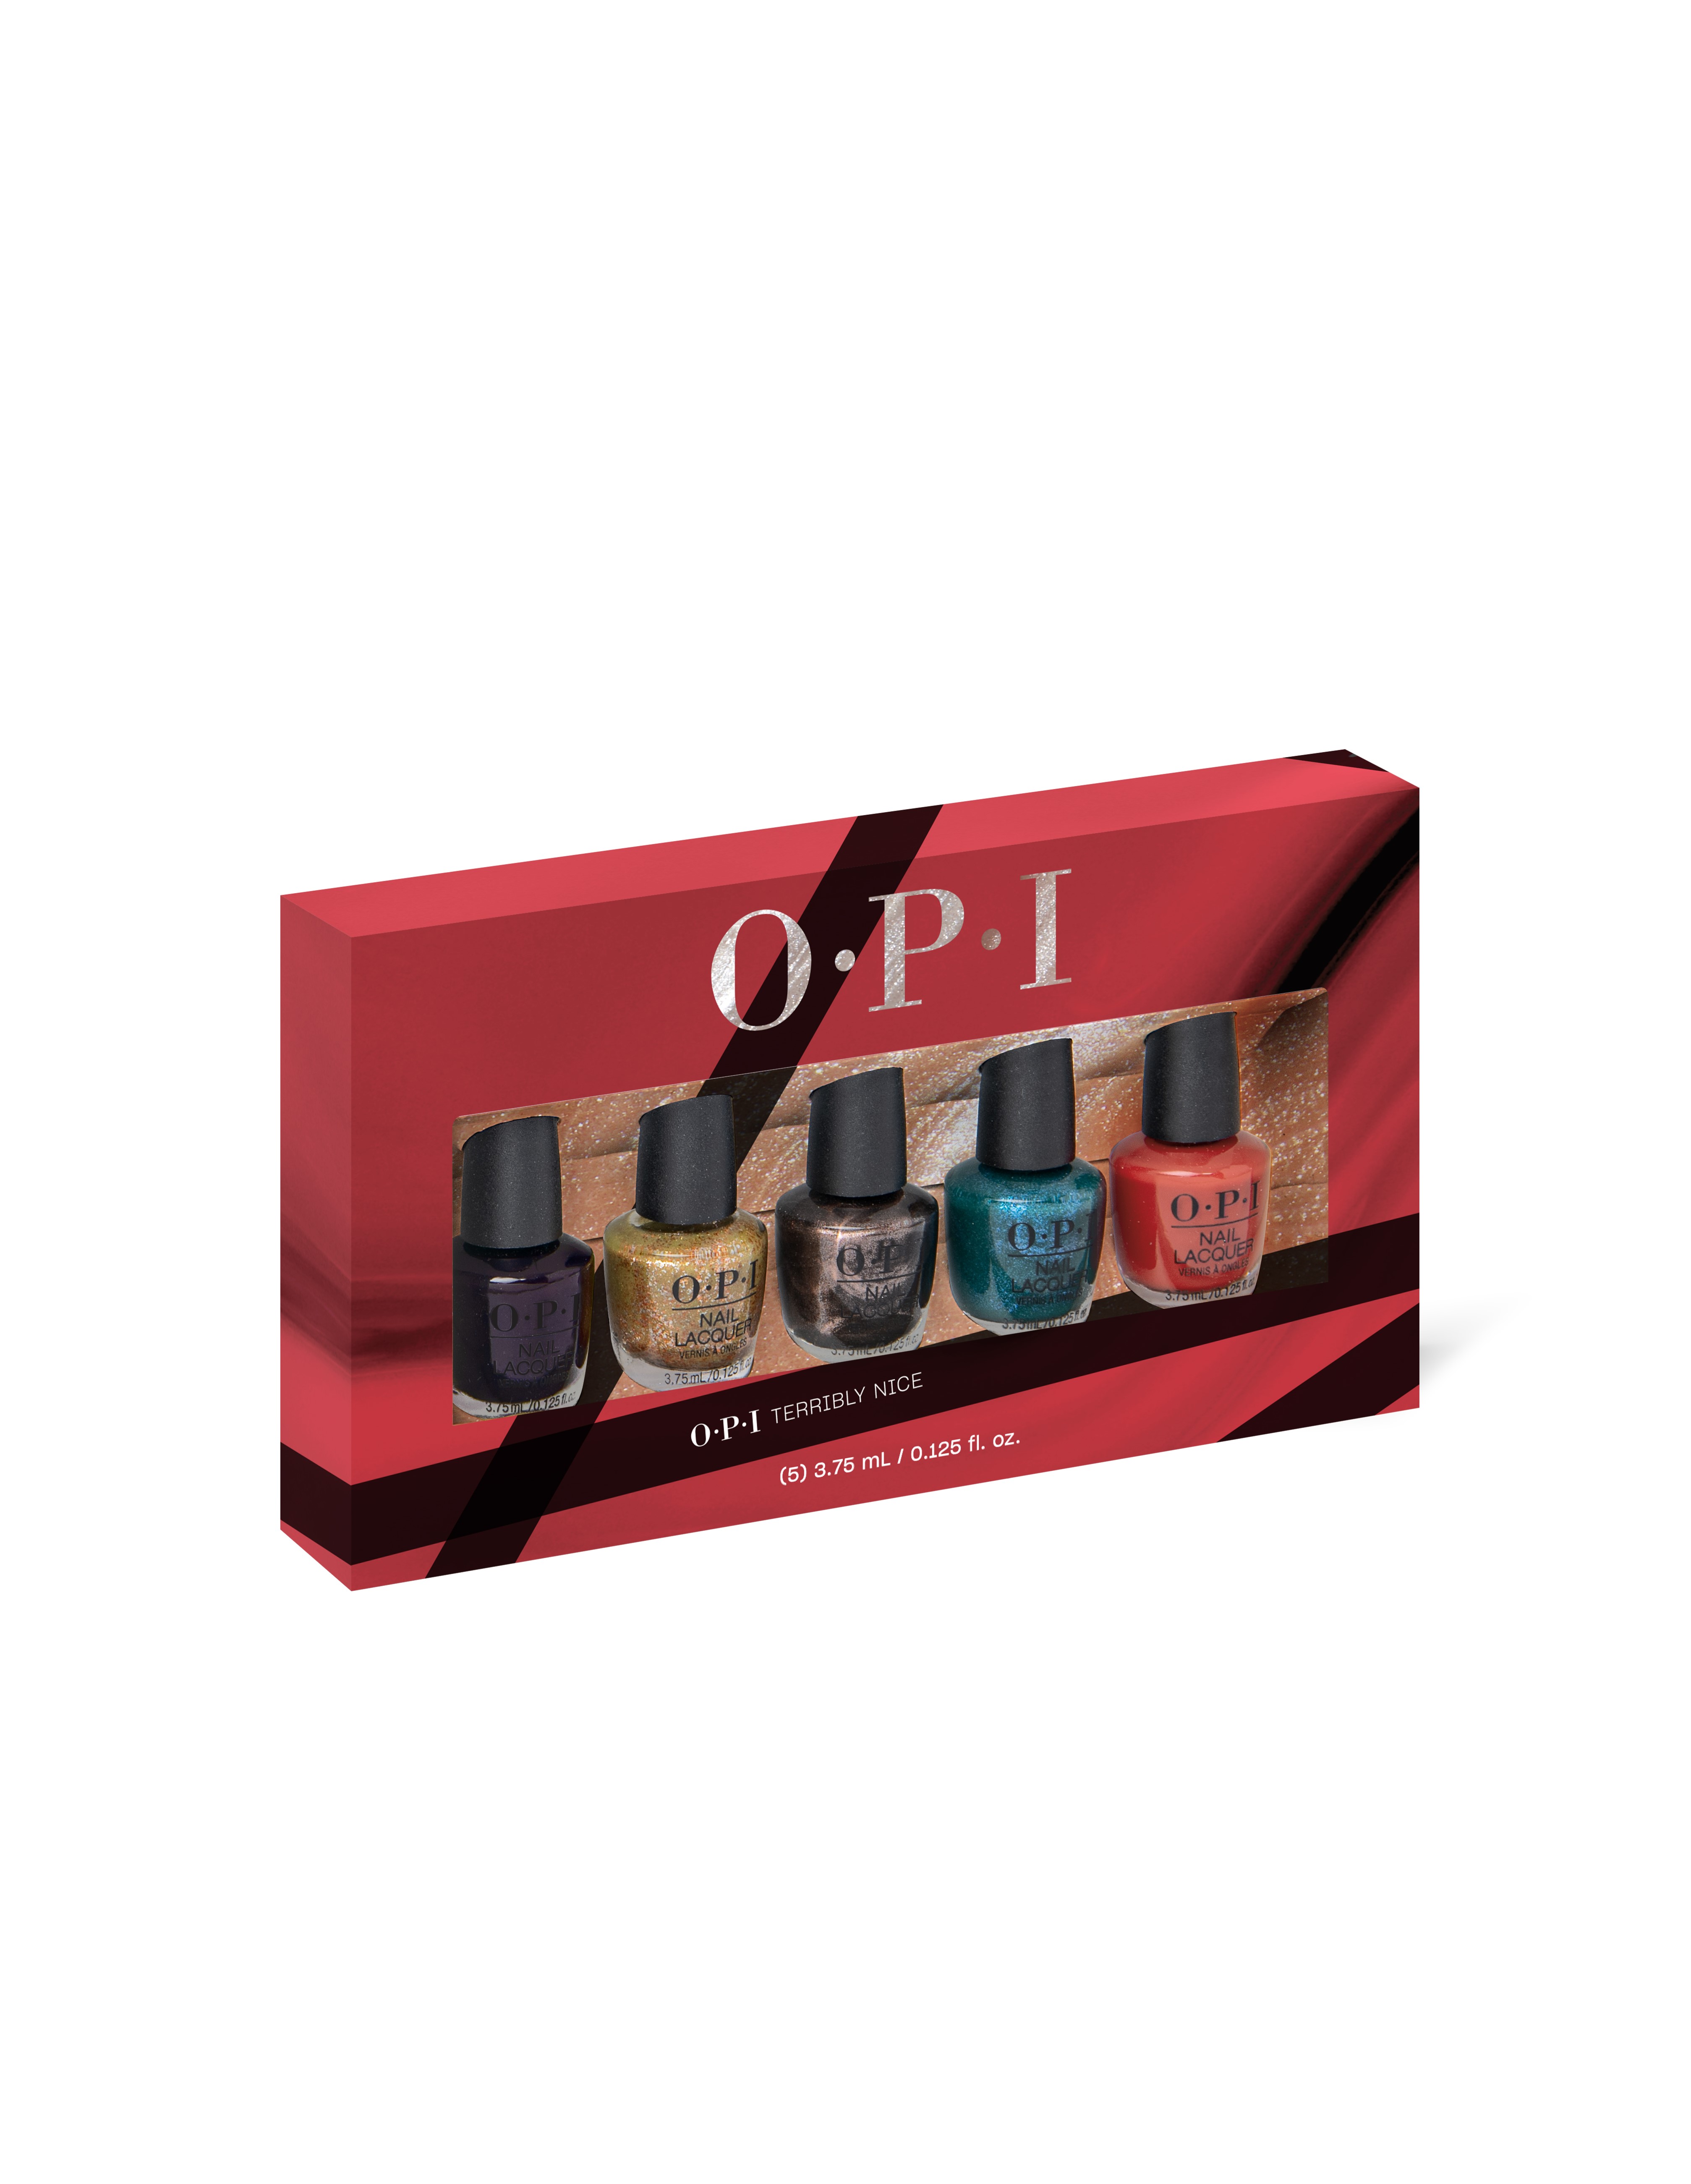 OPI Terribly Nice Nail Lacquer Mini 10 Piece Stocking Stuffer, Holiday Polish Gifts - image 3 of 4